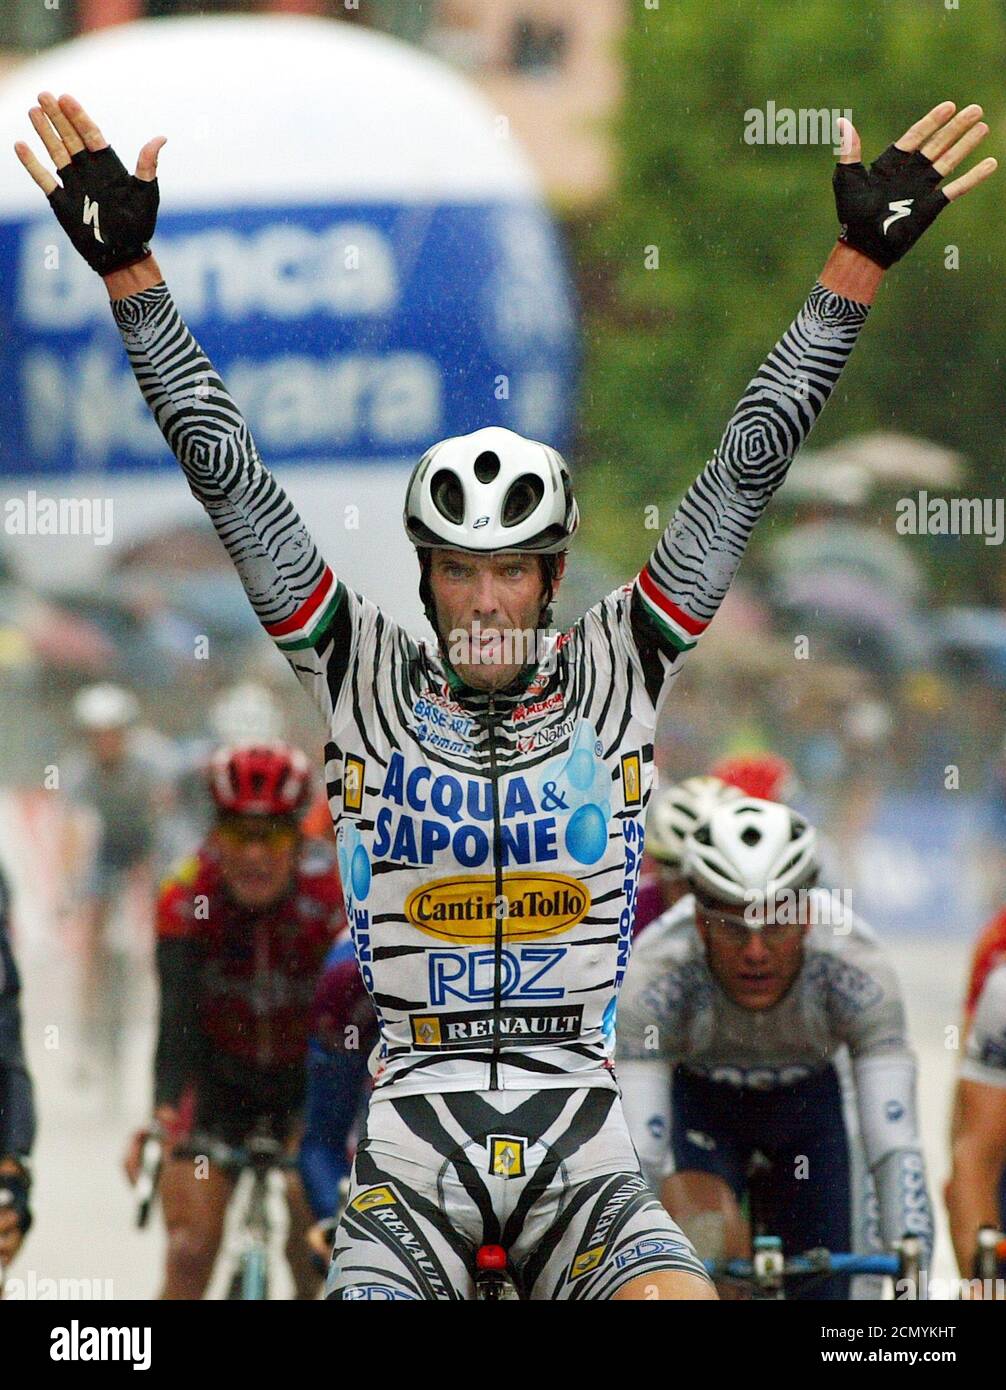 Italy's Mario Cipollini celebrates as he crosses the finish line to win the  fifteenth stage from Terme Euganee to Conegliano (km. 145,1) of the Giro  d'Italia May 28, 2002. Cipollini won the